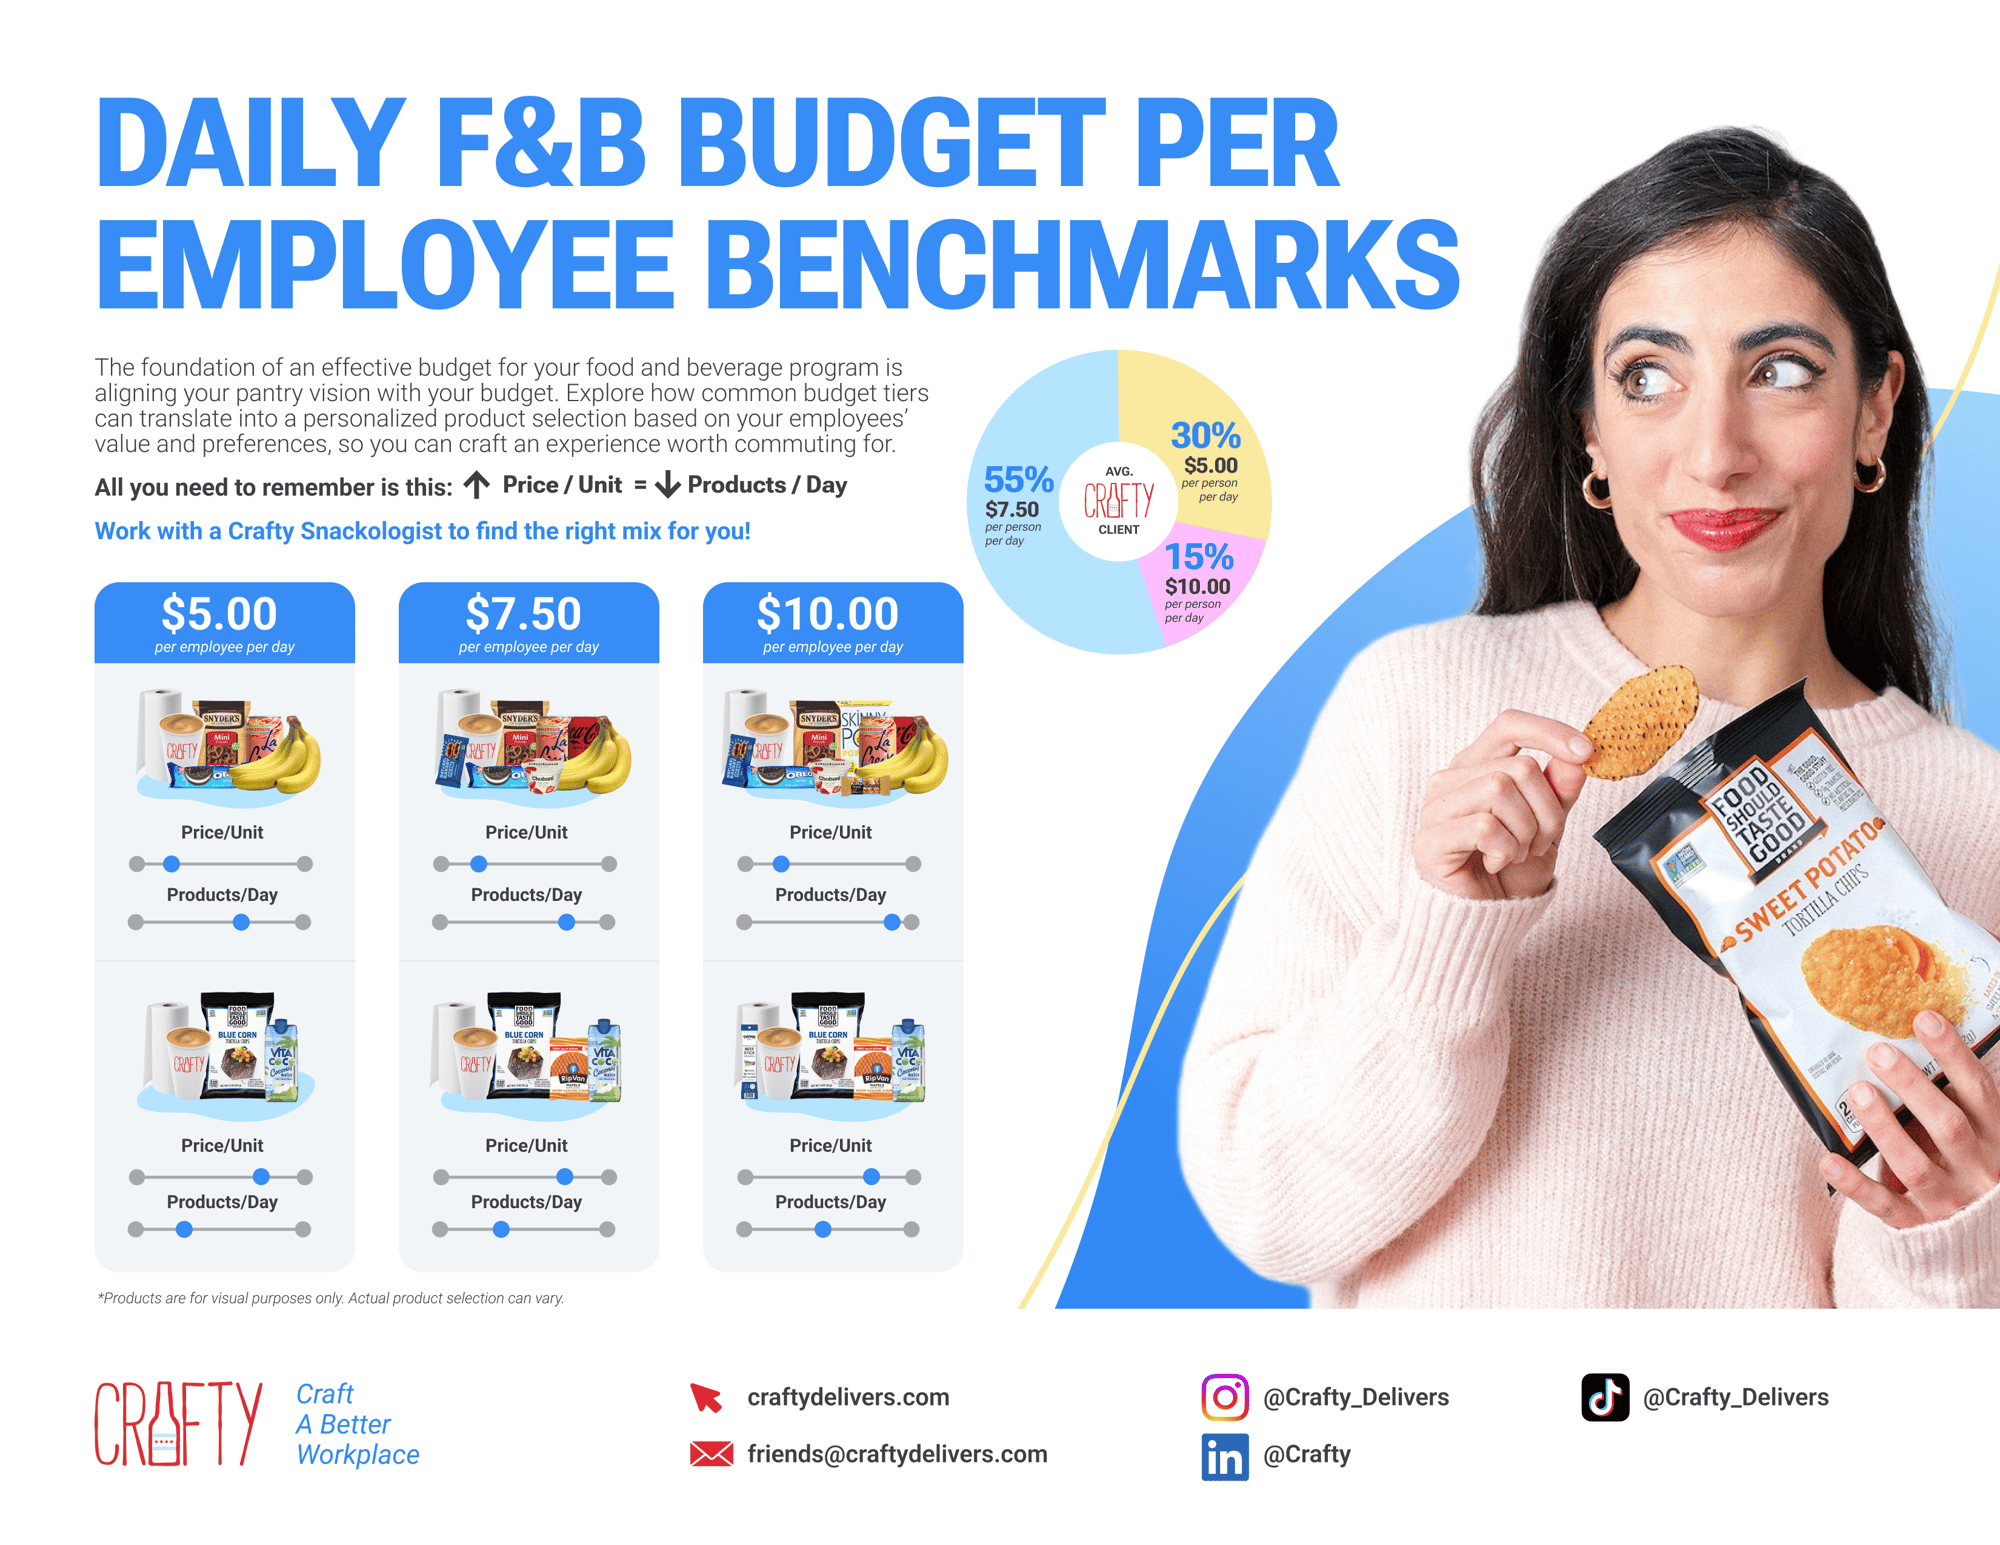 Daily F&B Budget per Employee Benchmarks